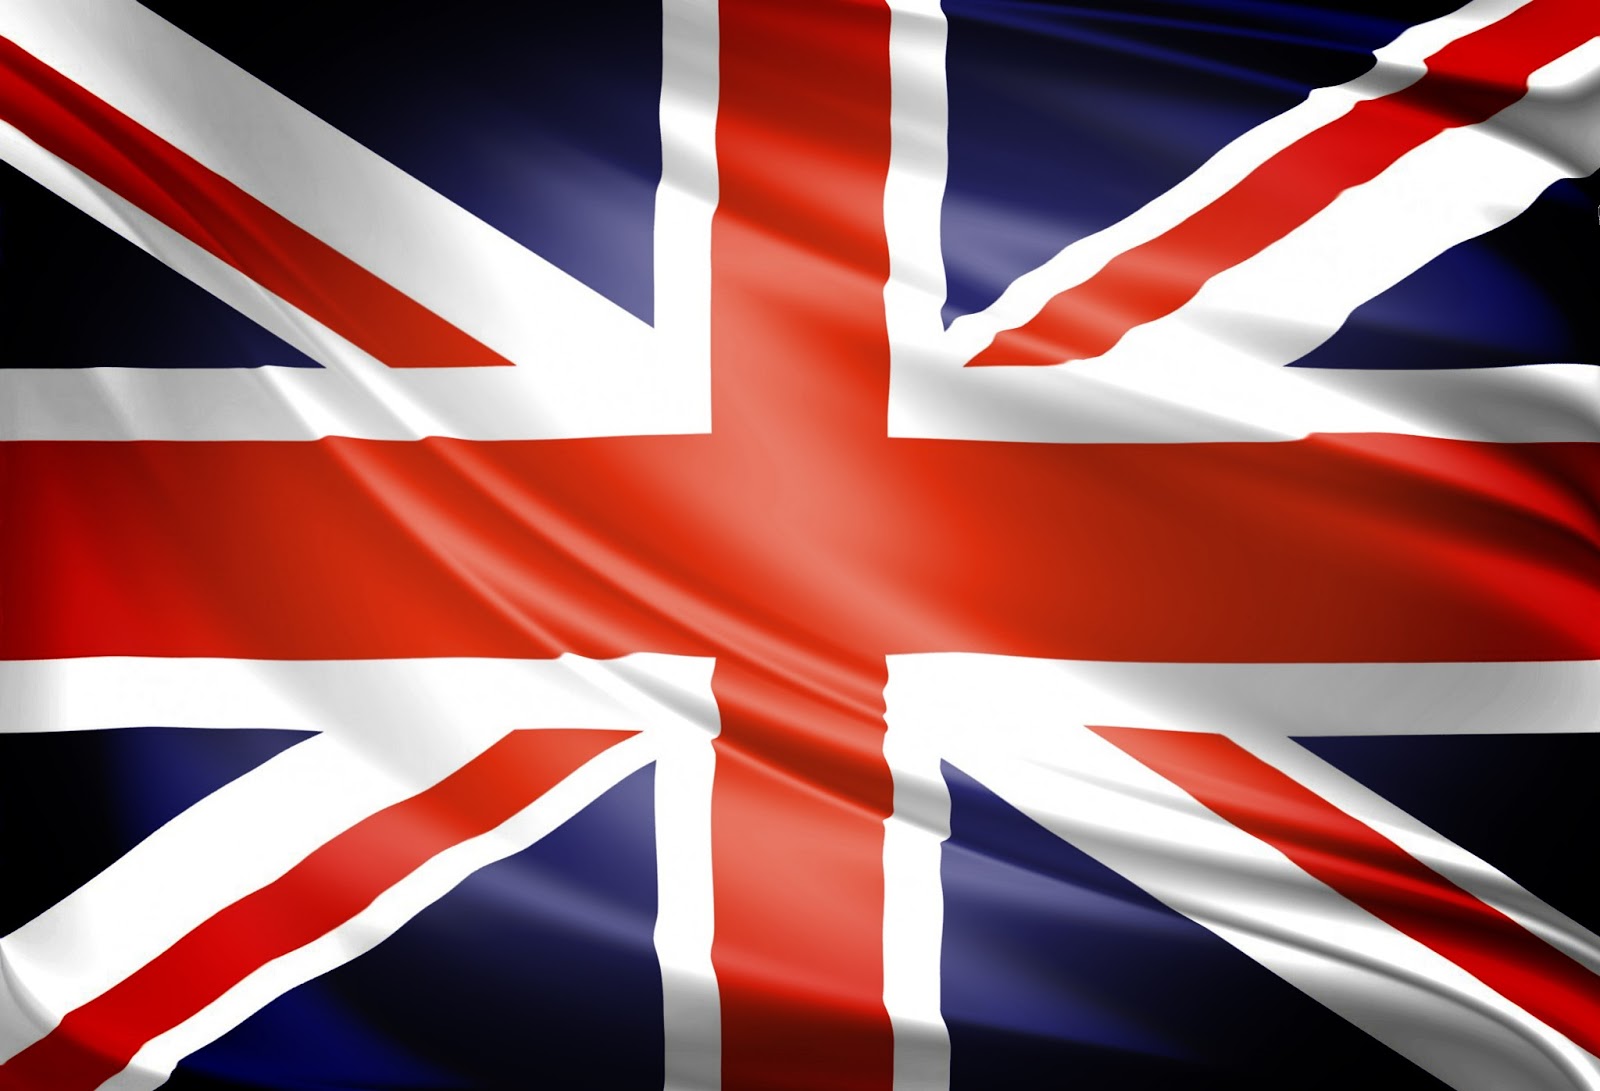 HD Wallpapers Fine britain flag HQ wallpapers free download